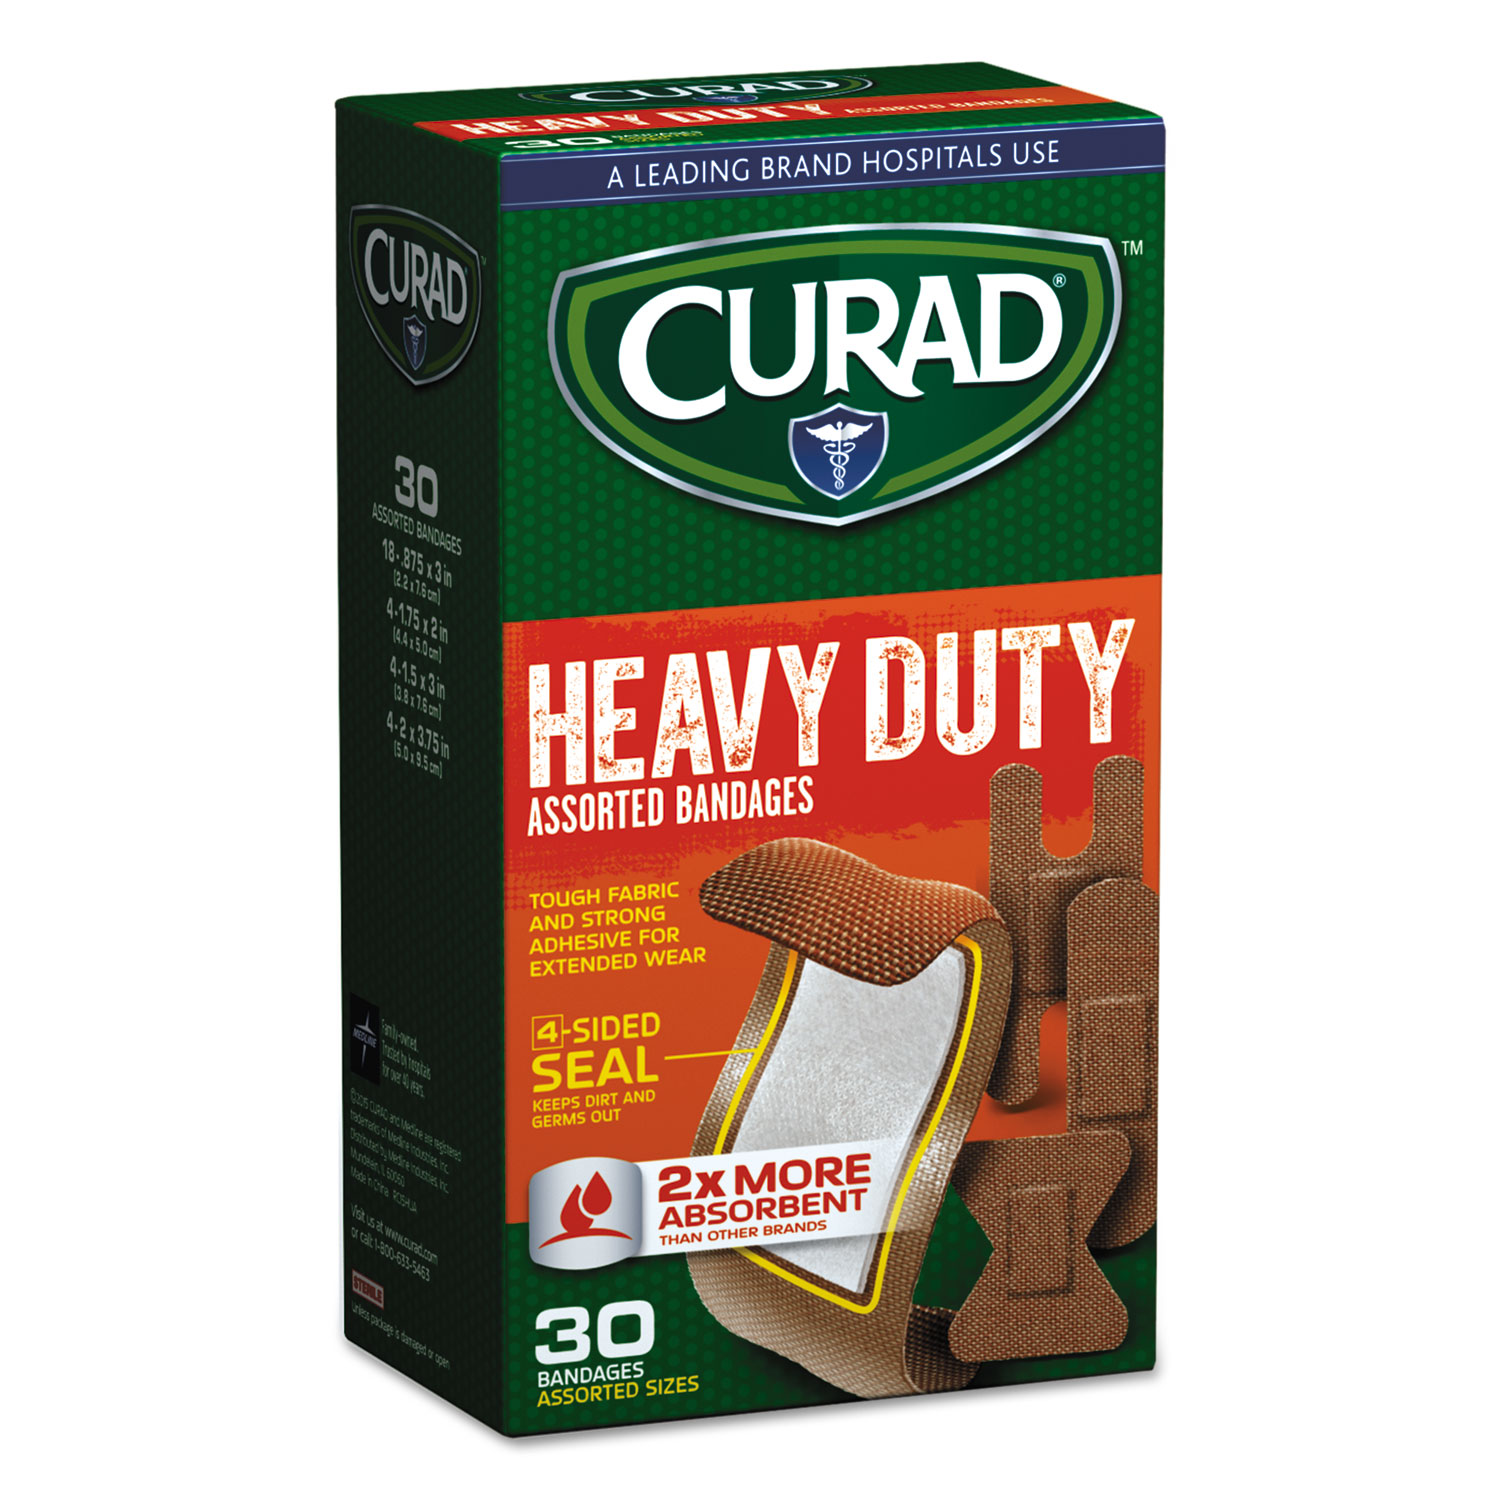  Curad CUR14924RB Heavy Duty Bandages, Assorted Sizes, 30/Box (MIICUR14924RB) 